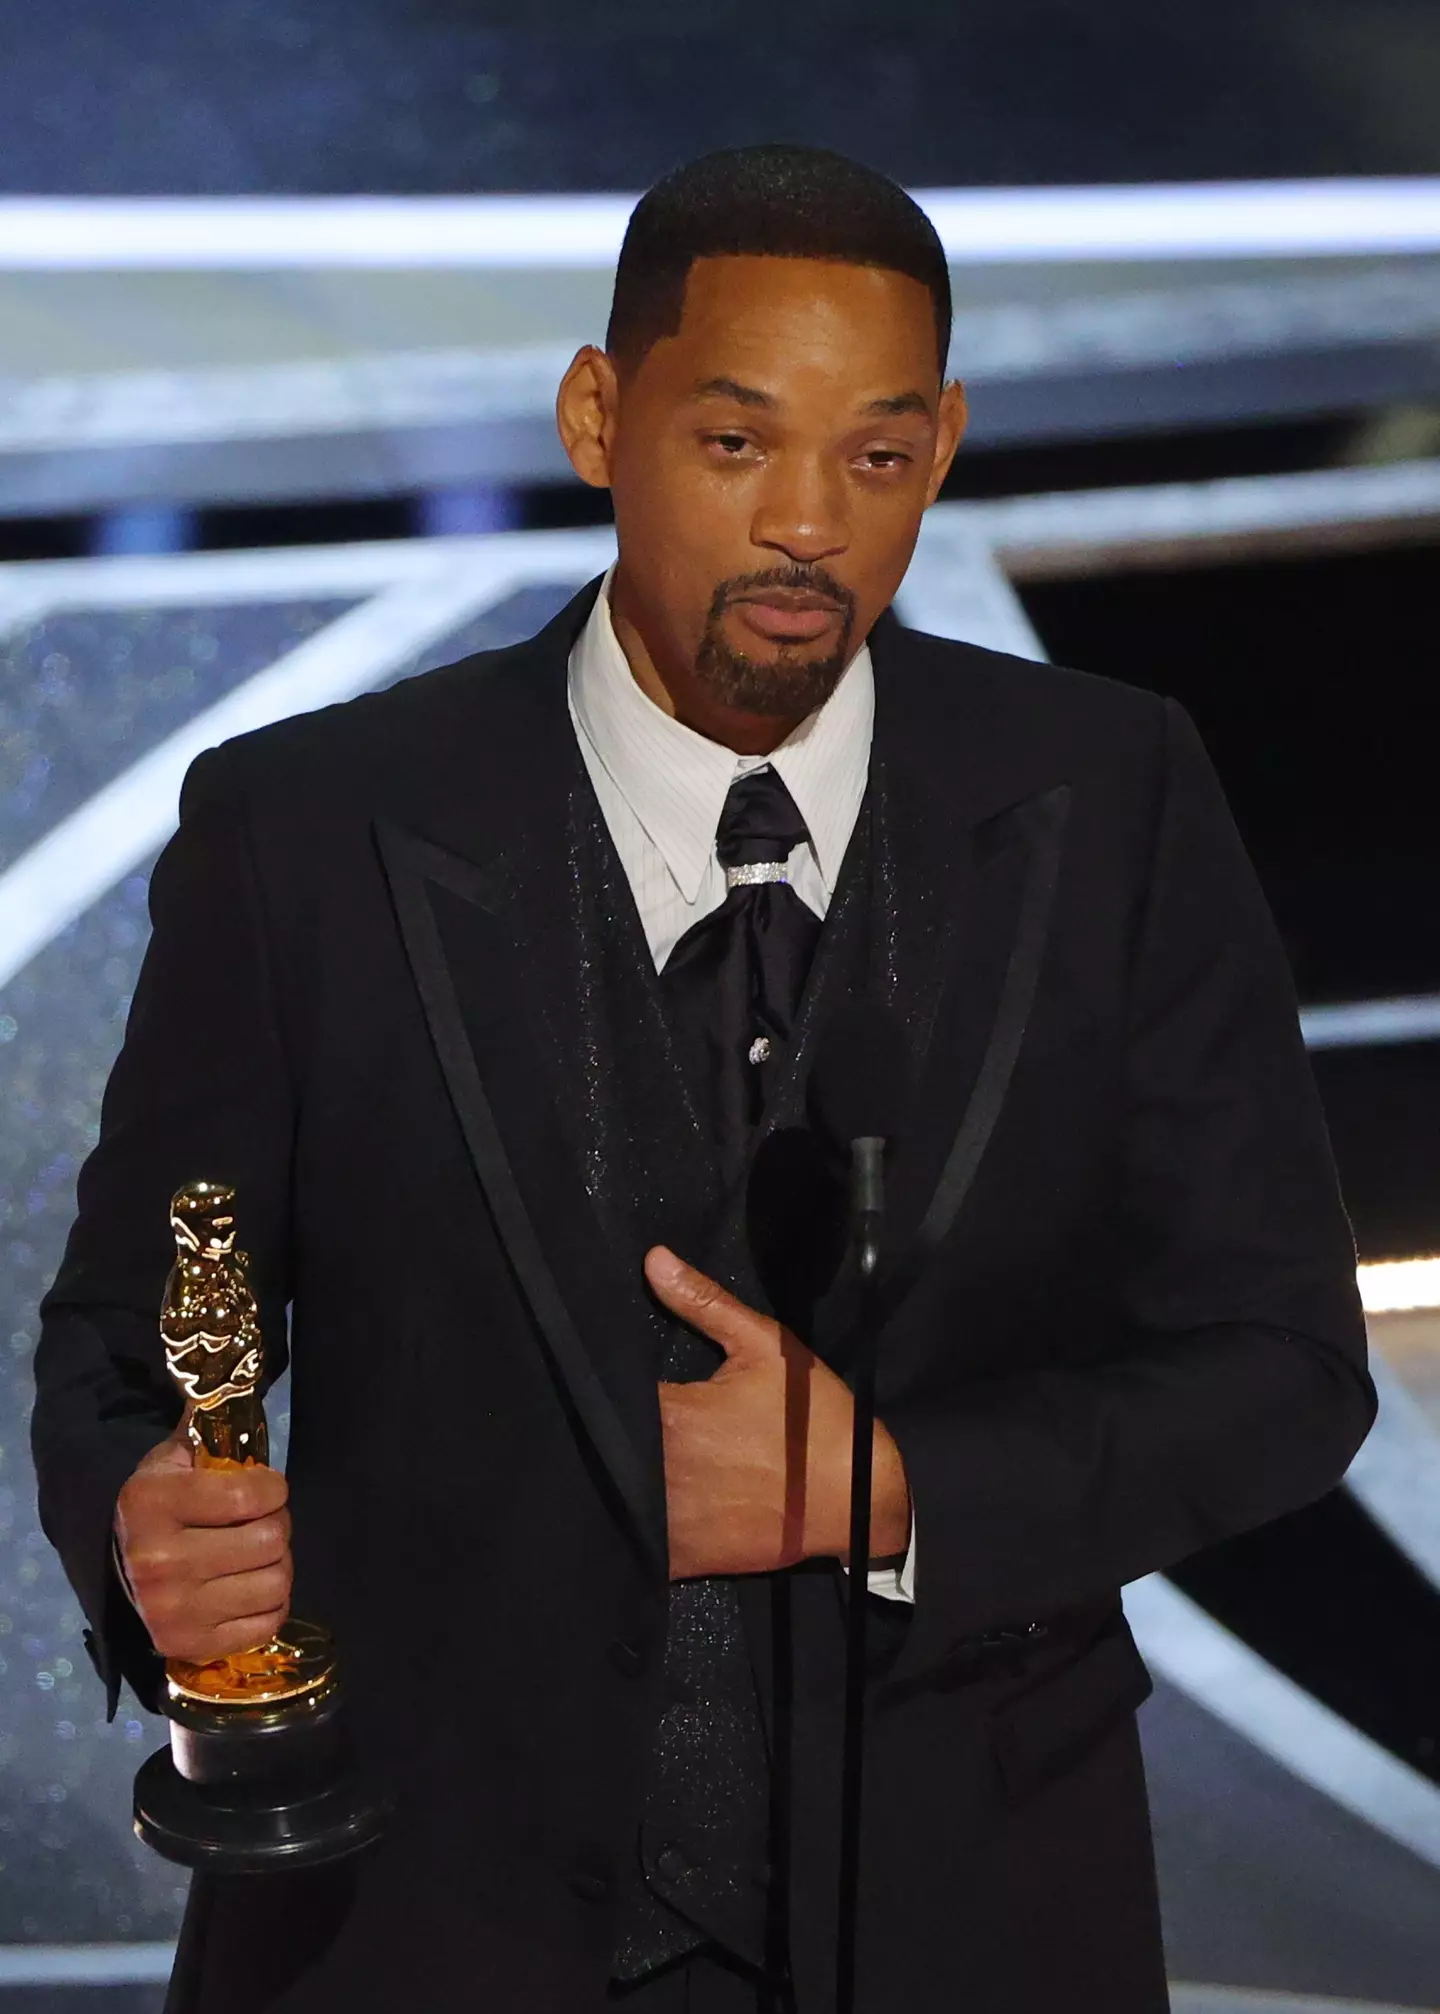 Will Smith won the award for Best Actor after slapping Chris Rock.